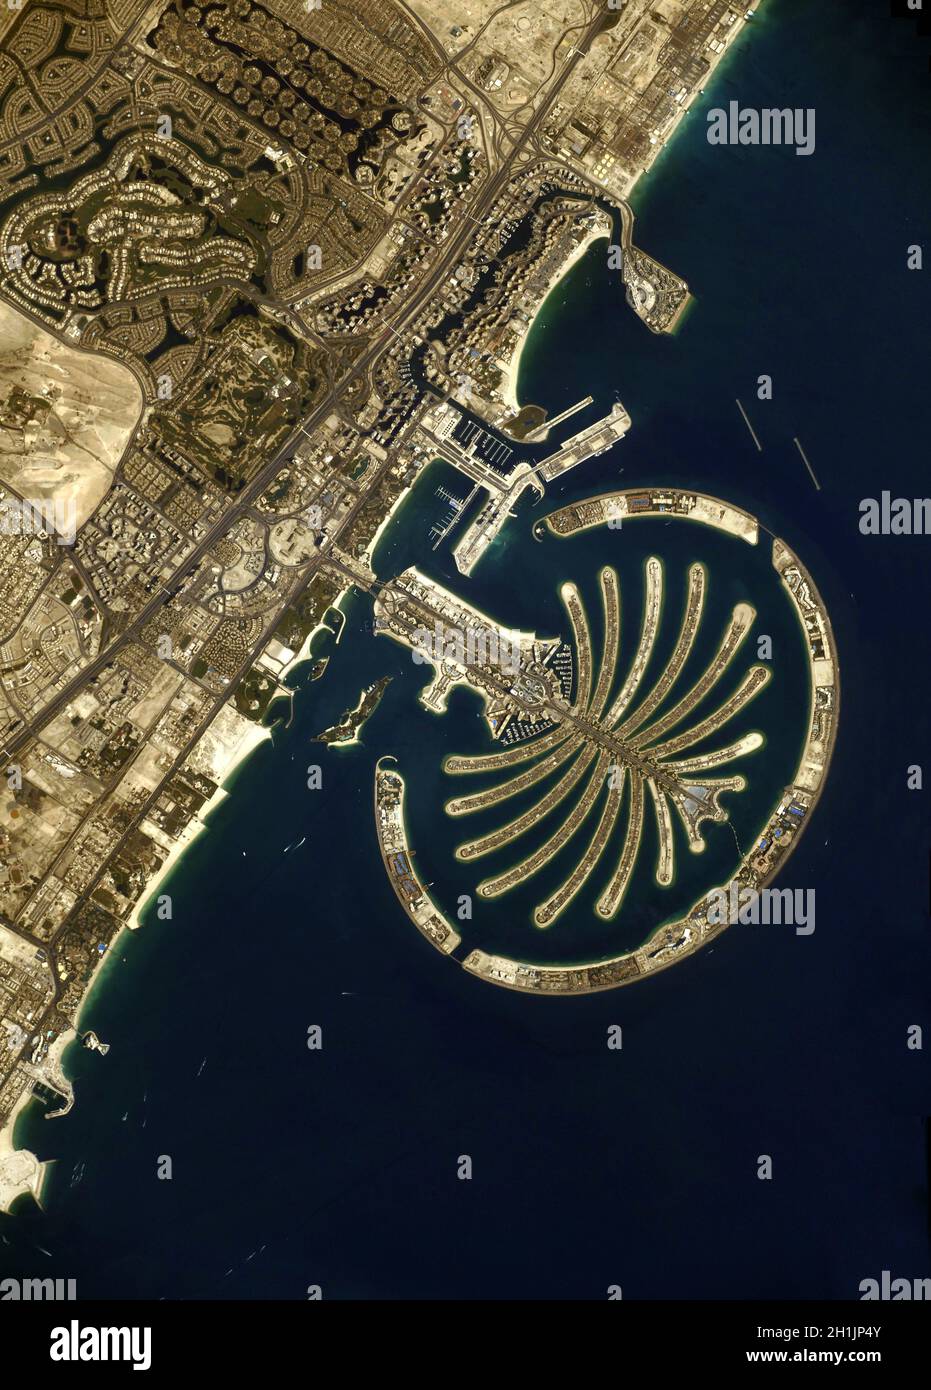 A view of Earth from the International Space Station:  Dubai and the man-made Palm Jumeirah islands. The construction of the Palm Islands involves dredging sand from the bottom of the Persian Gulf United Arab Emirates Dubai. tourist and residential development.  An optimised and digitally enhanced version of a NASA/ ESA image. Mandatory Credit: NASA/ESA/T. Pesquet. NB: Usage restrictions: Not to be presented as an endorsement. Stock Photo